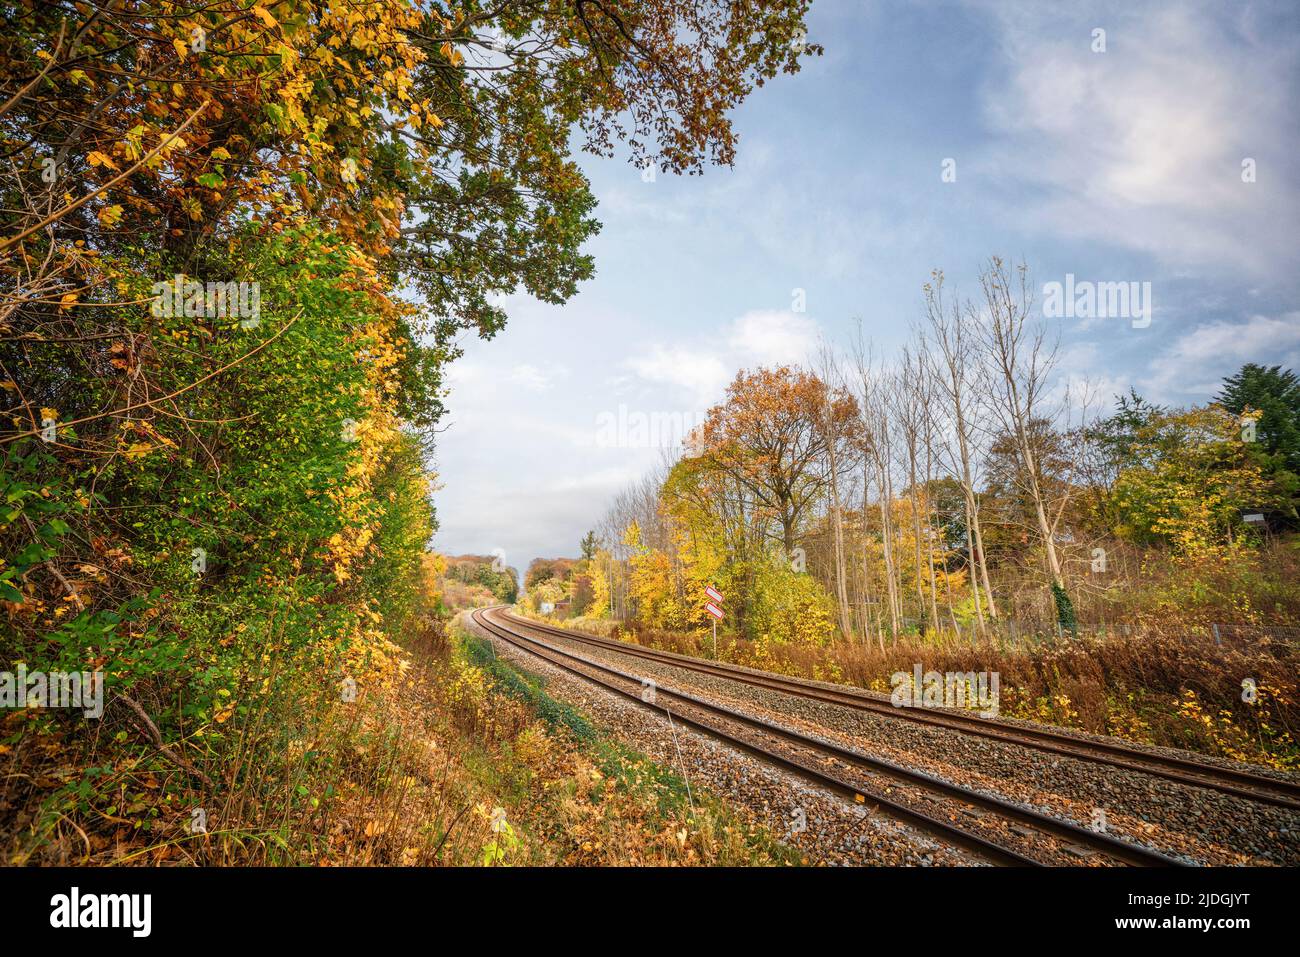 Railroad going through an autumn colored landscape with colorful trees in the fall Stock Photo